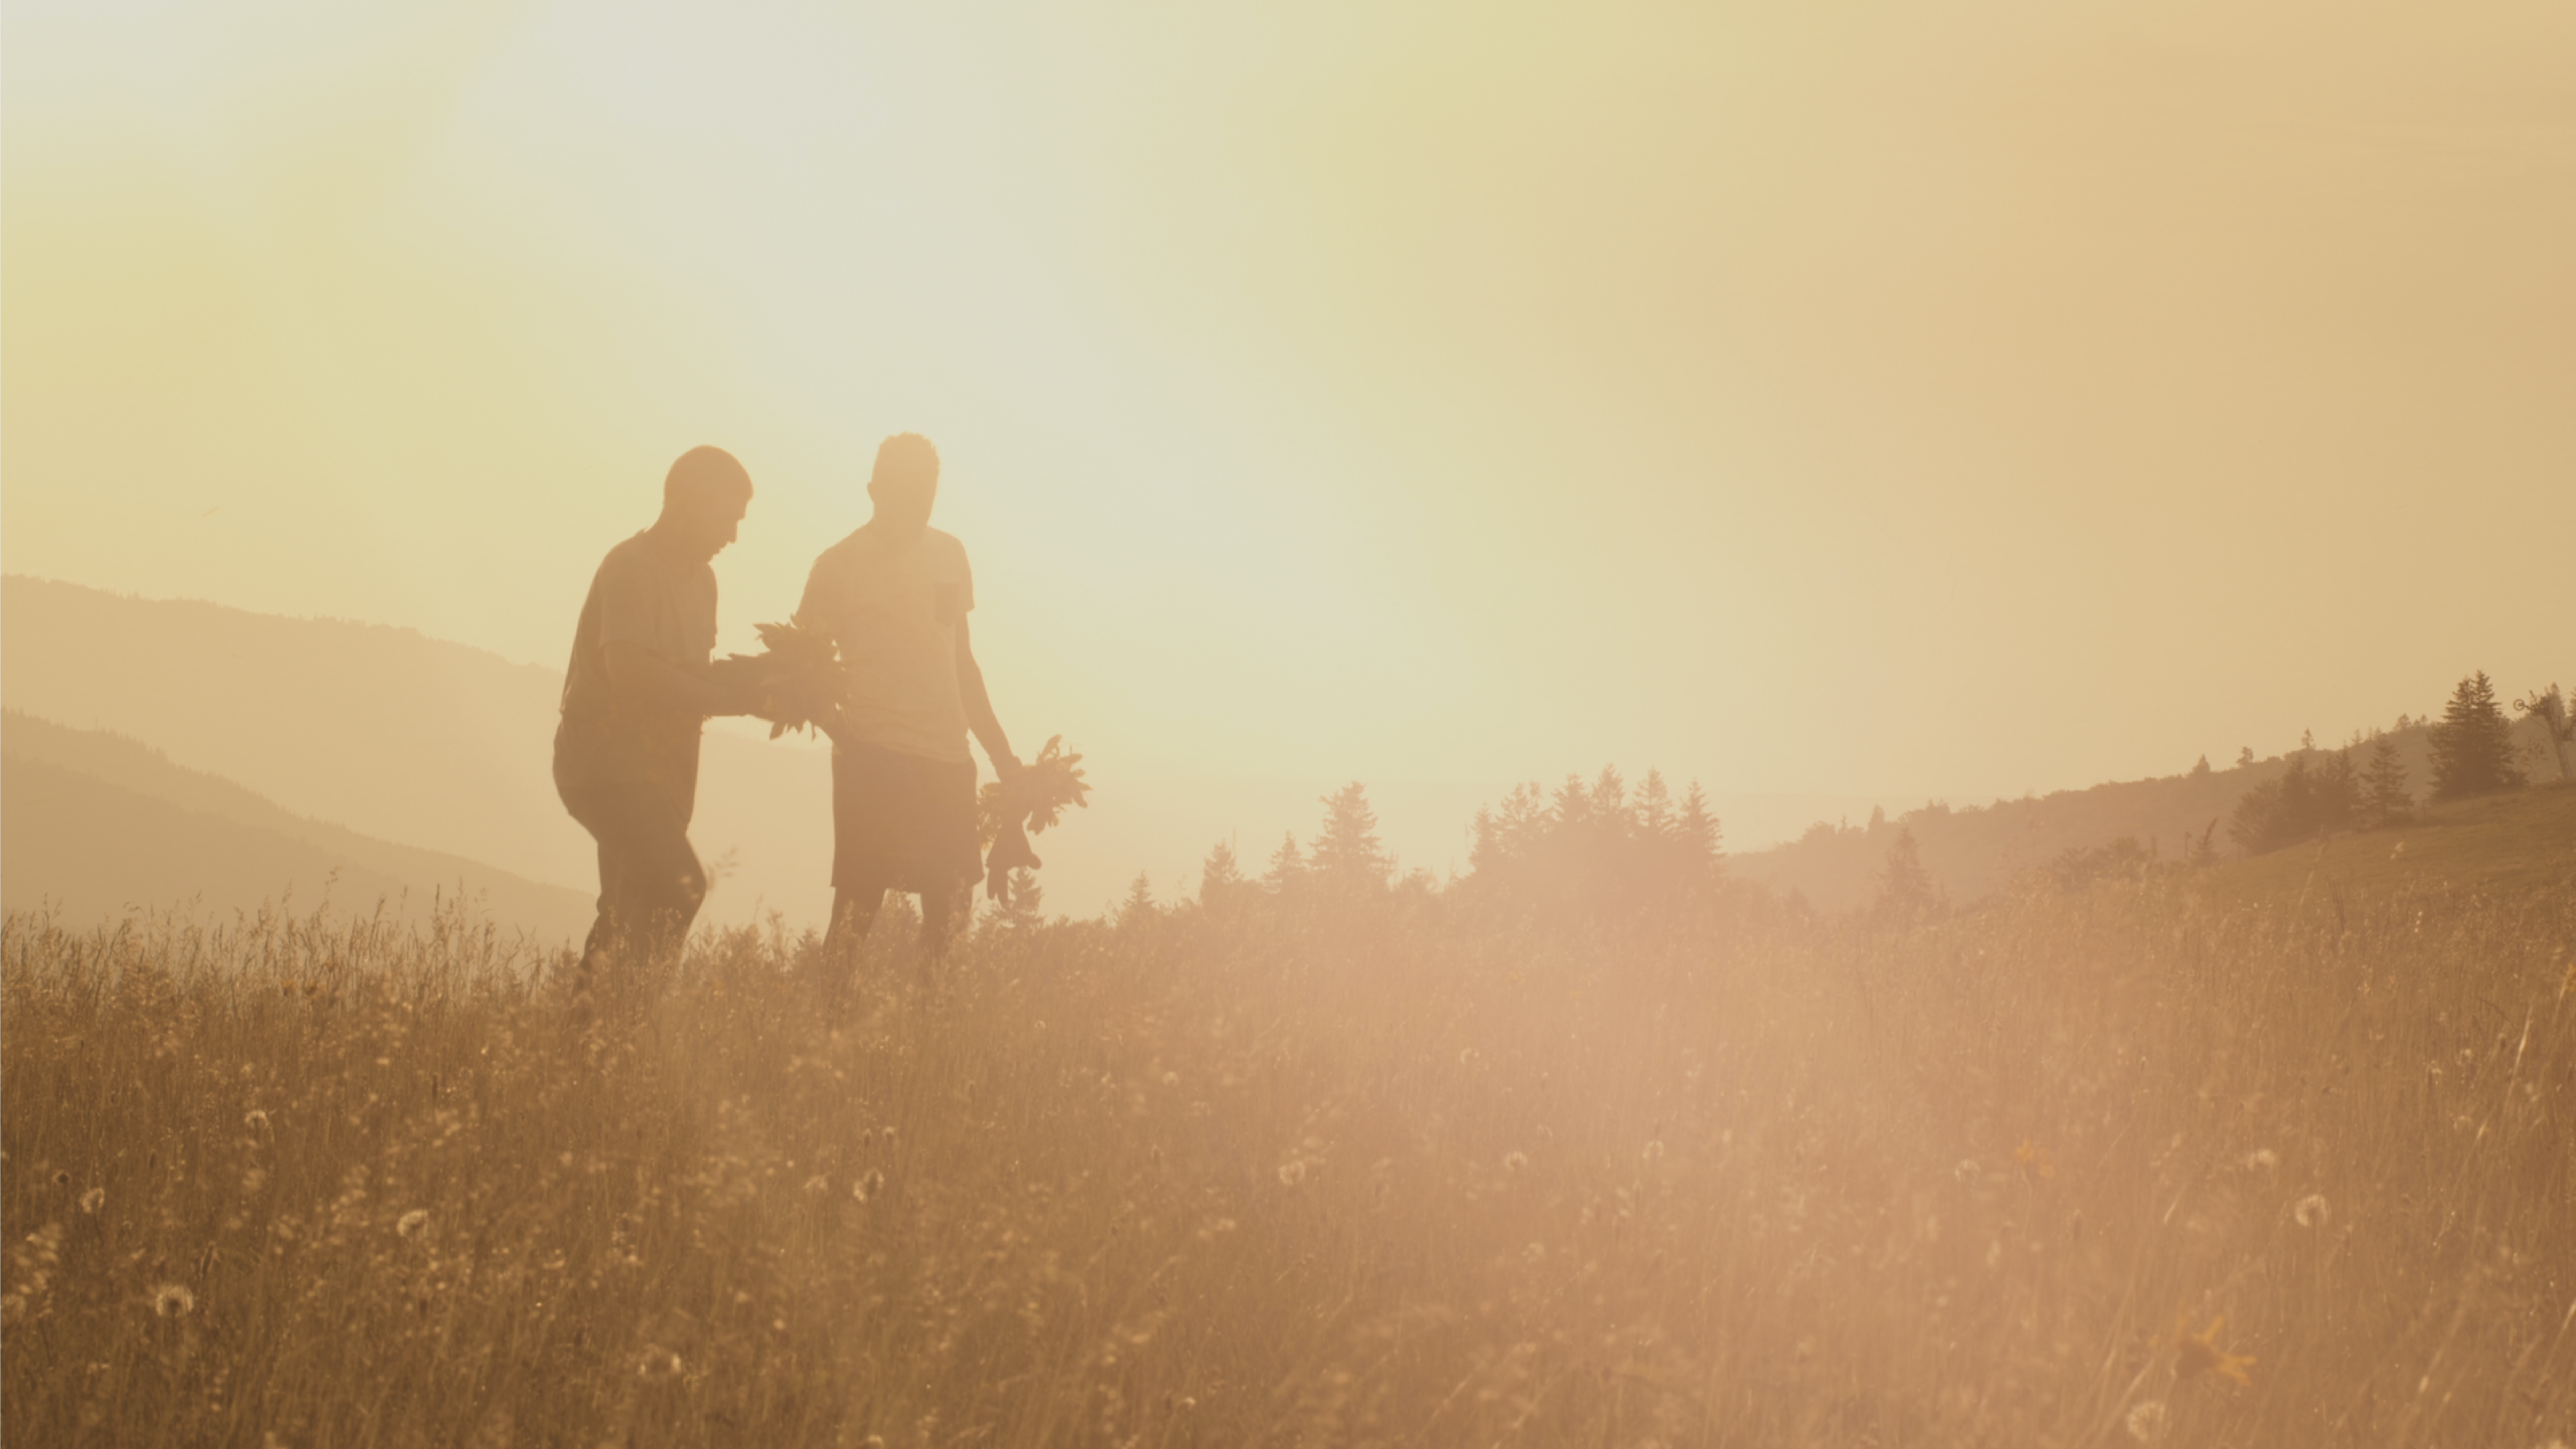 Two people walking across a sun drenched field at harvest